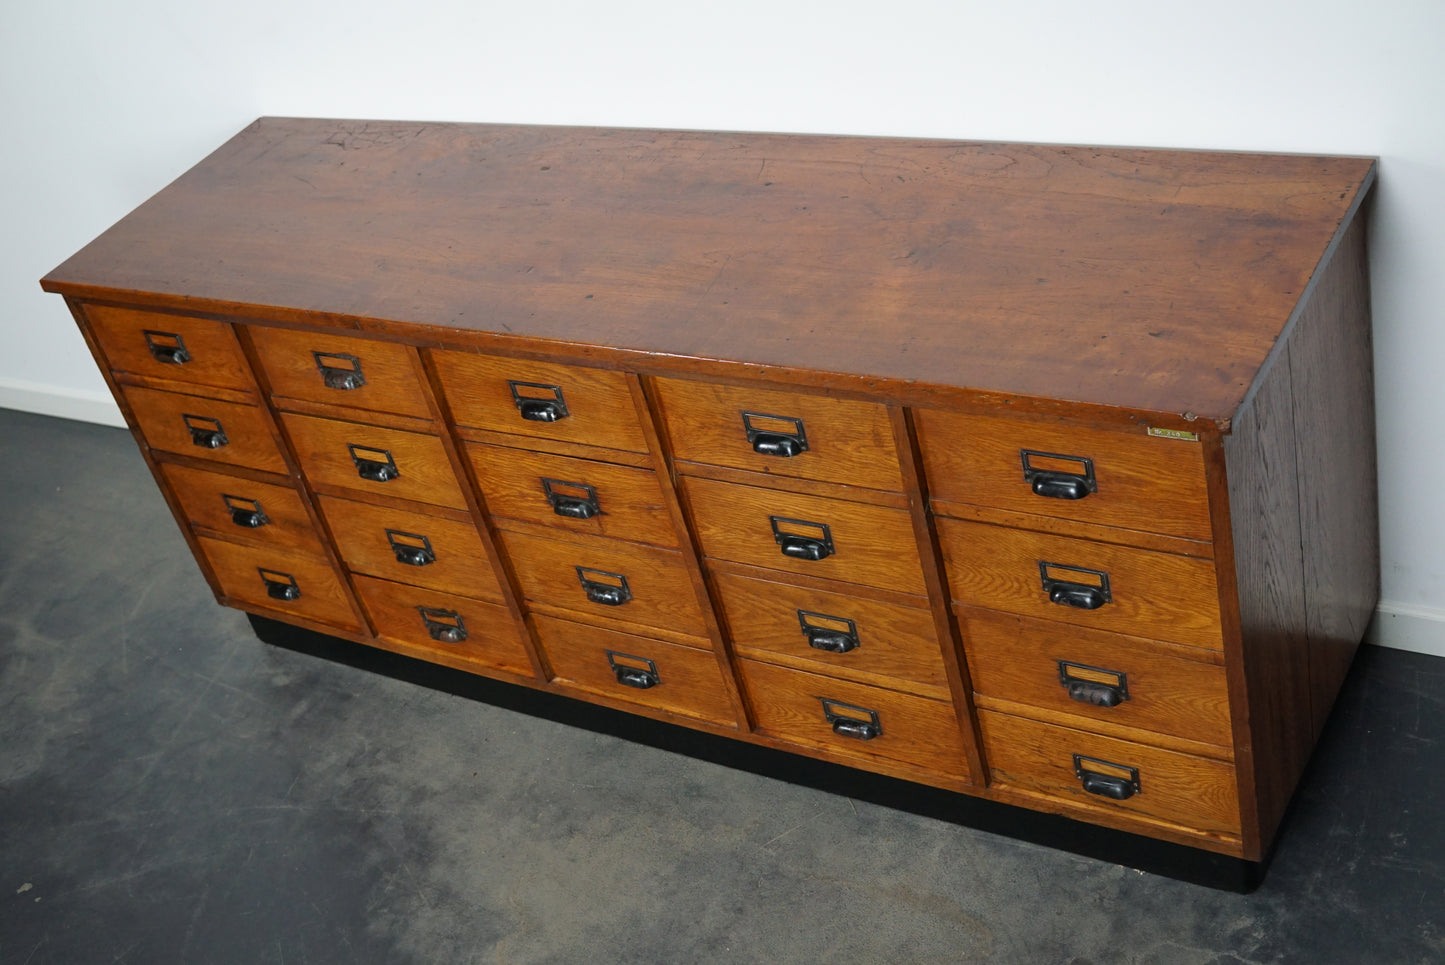 German Industrial Oak Apothecary Cabinet, Mid-20th Century